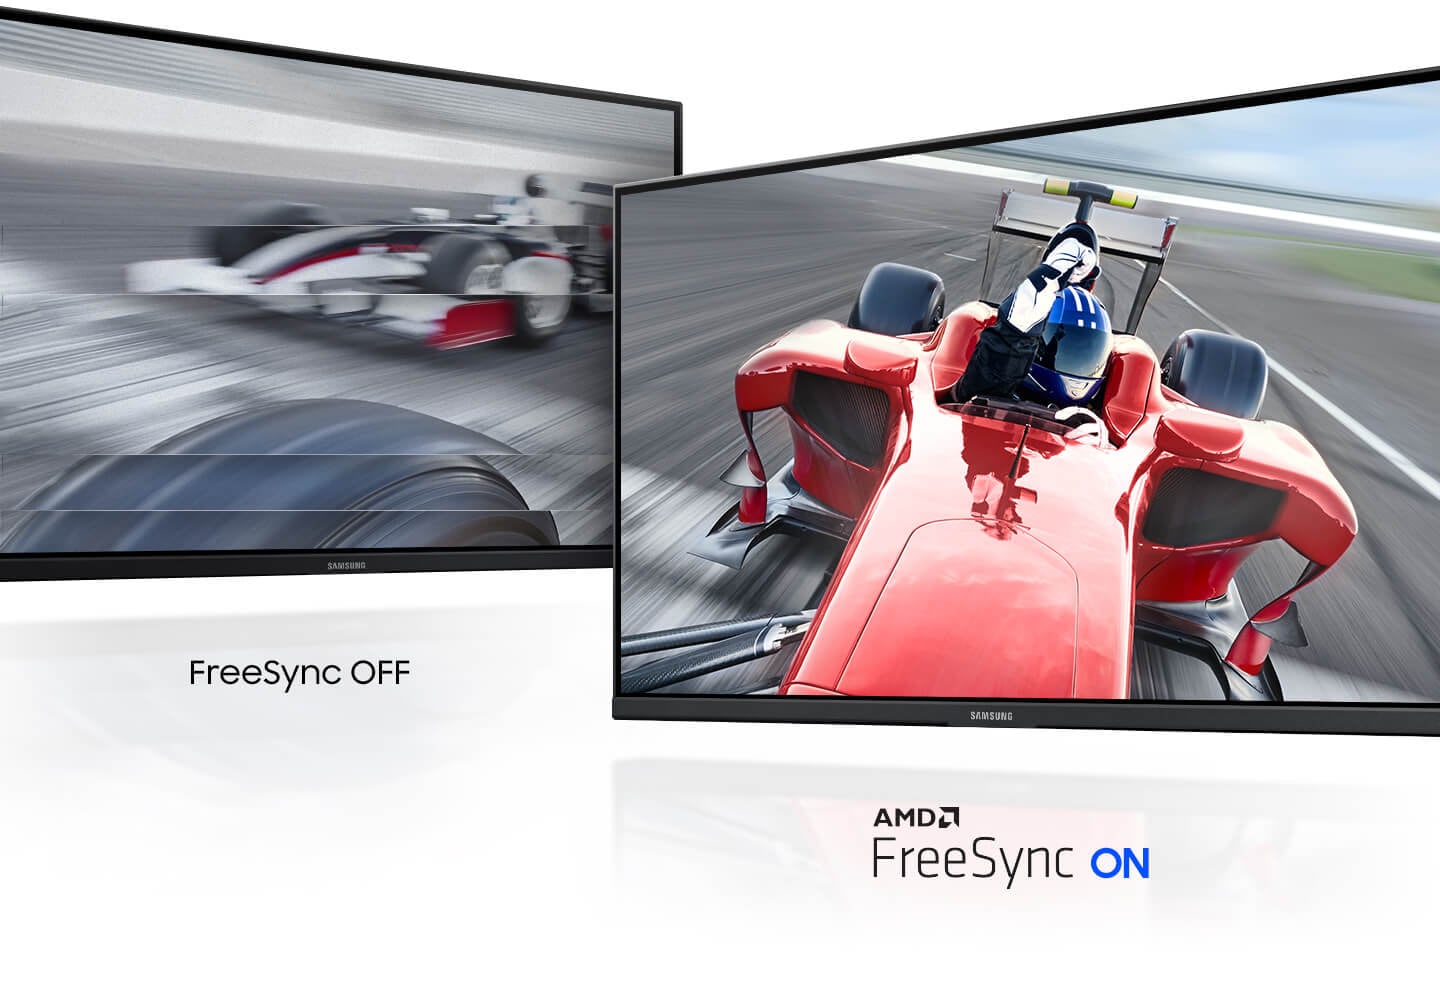 One monitor screen with Freesync has no tear or stutter even in fast action scenes, while the other without Freesync has.